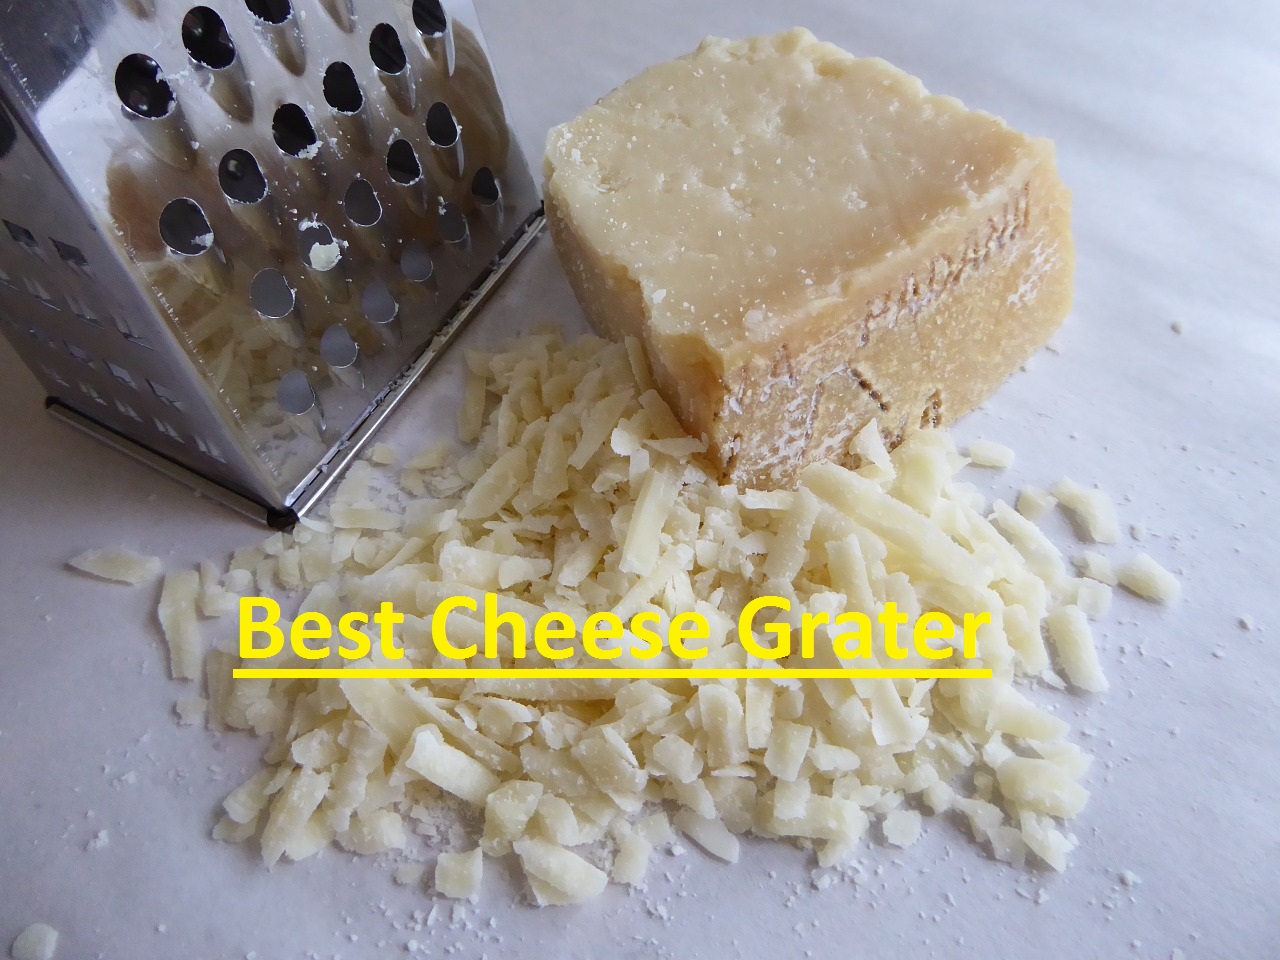 The 7 Best Cheese Grater Test Kitchen to Buy of [year]